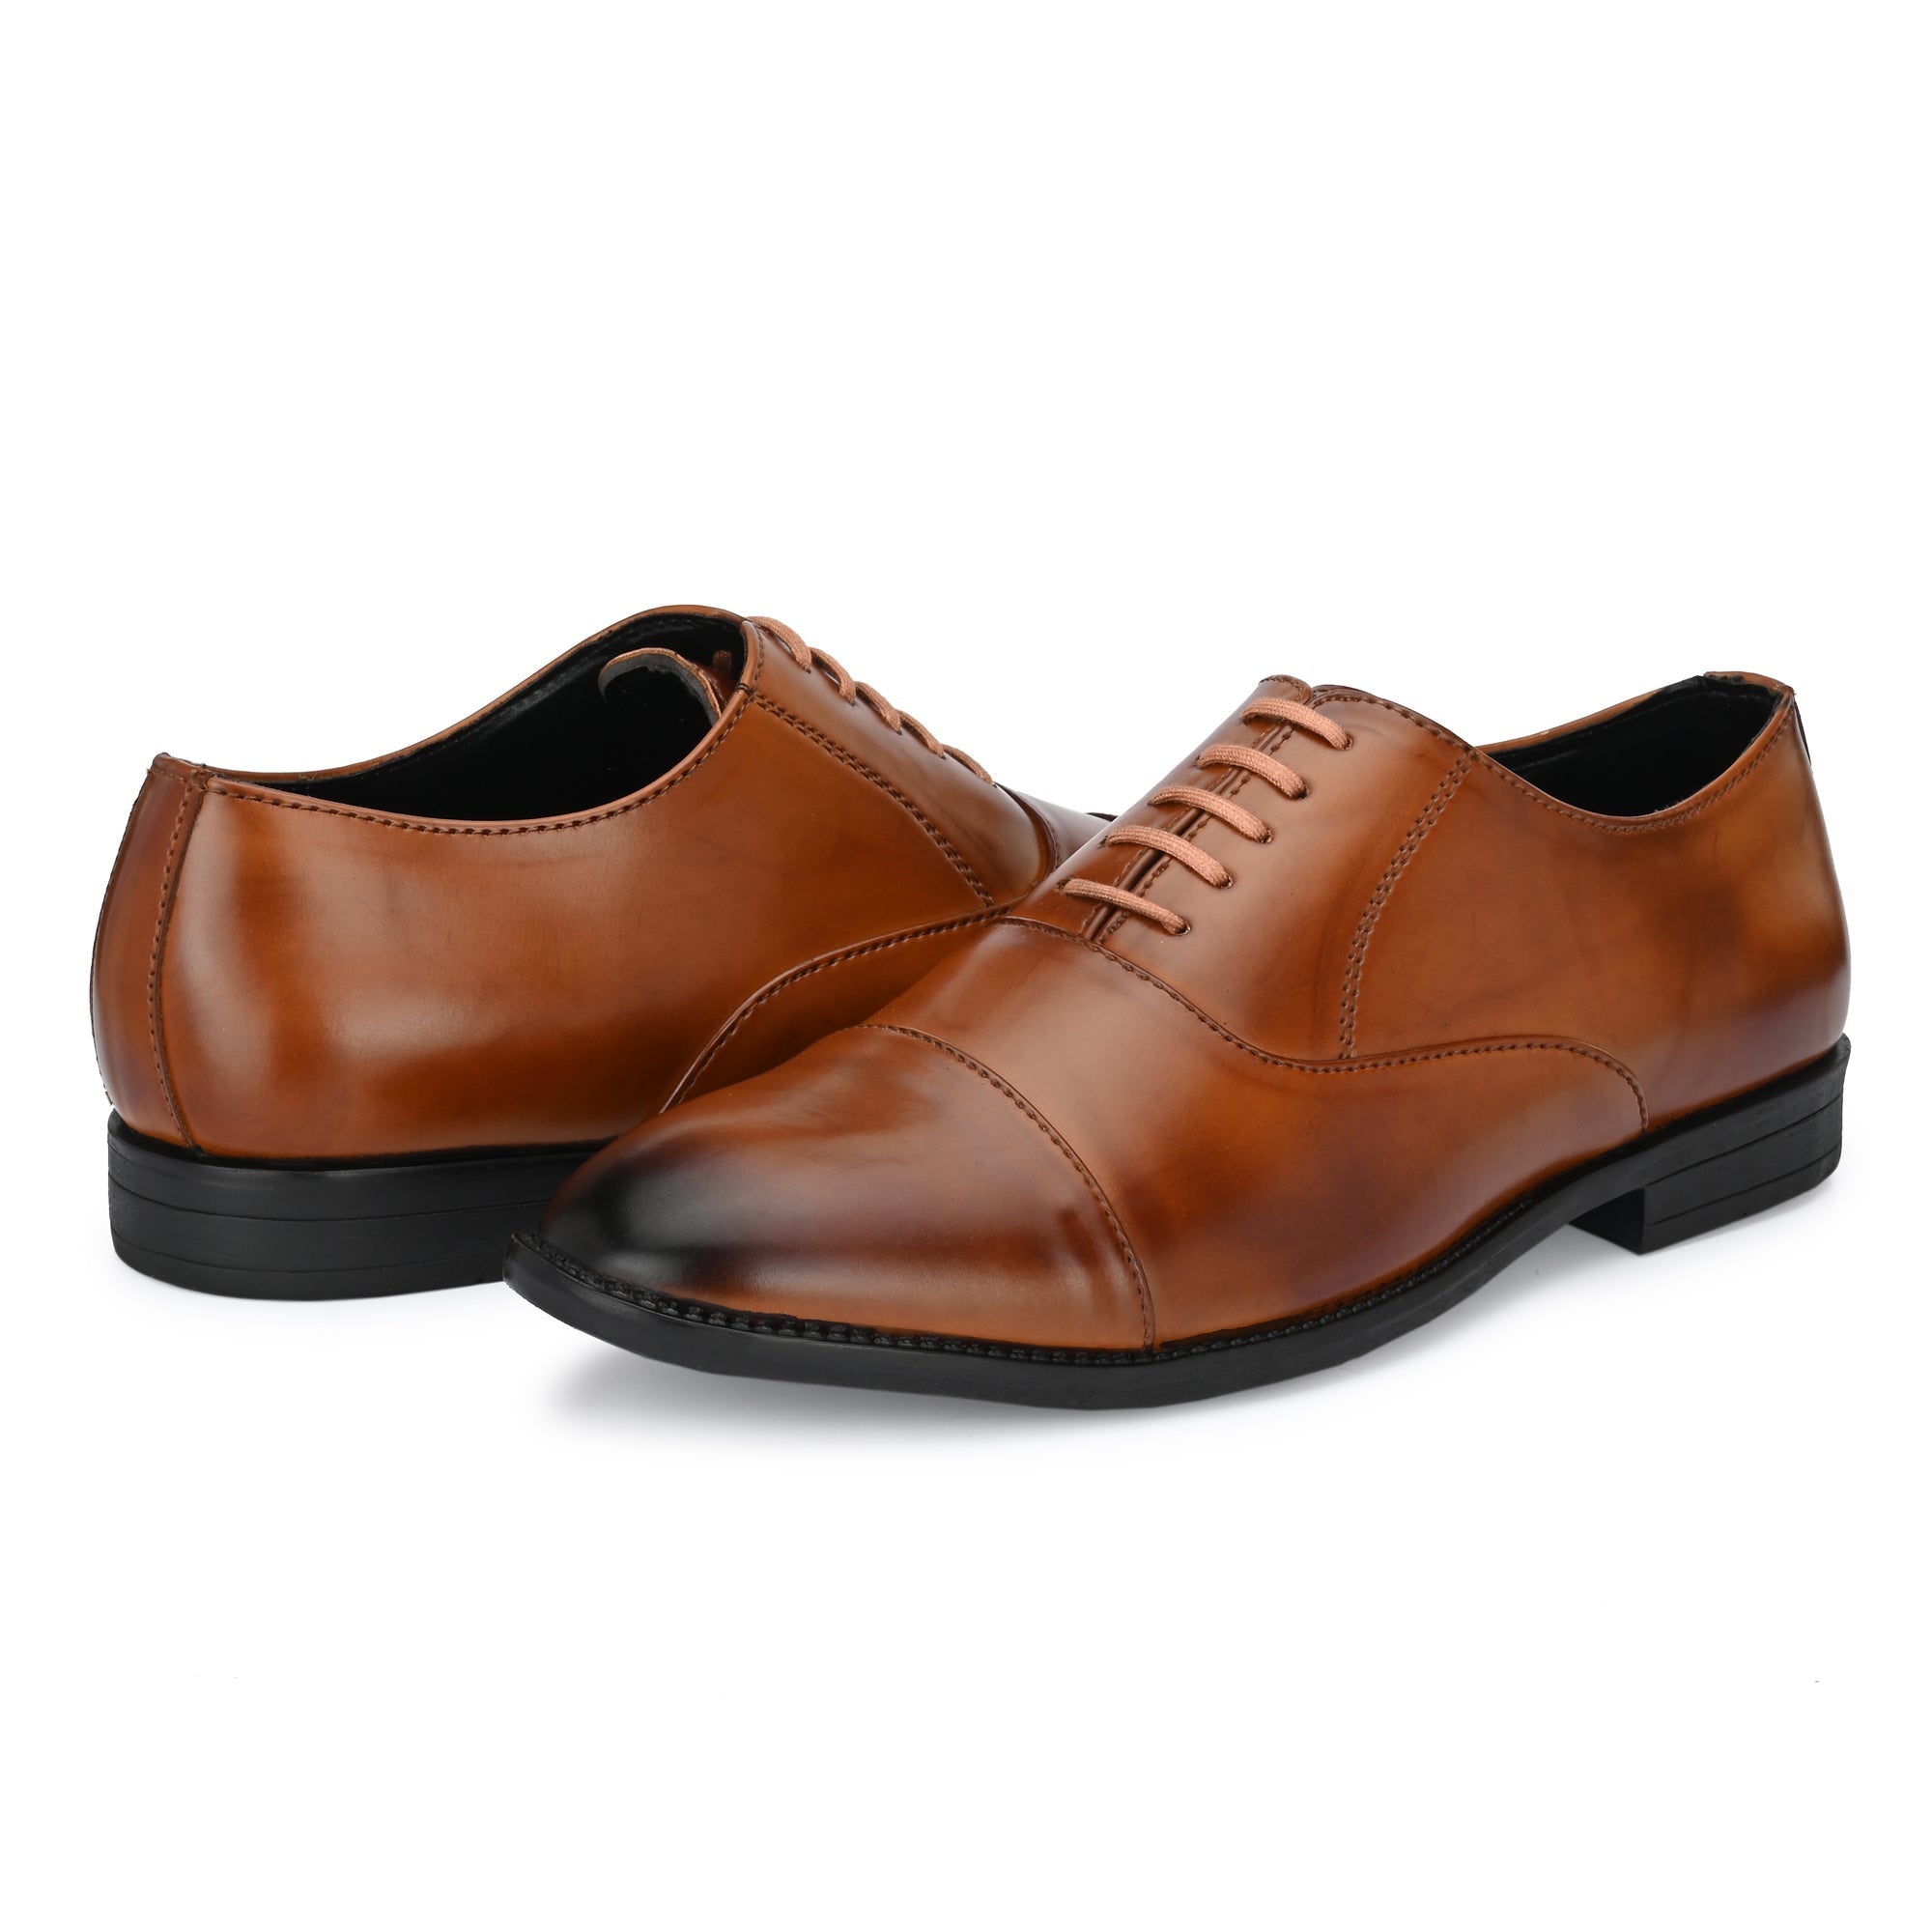 Attitudist Handcrafted Oxford Tan Plain Formal Laceup Derby Shoes With Cap Toe For Men MTOBSF